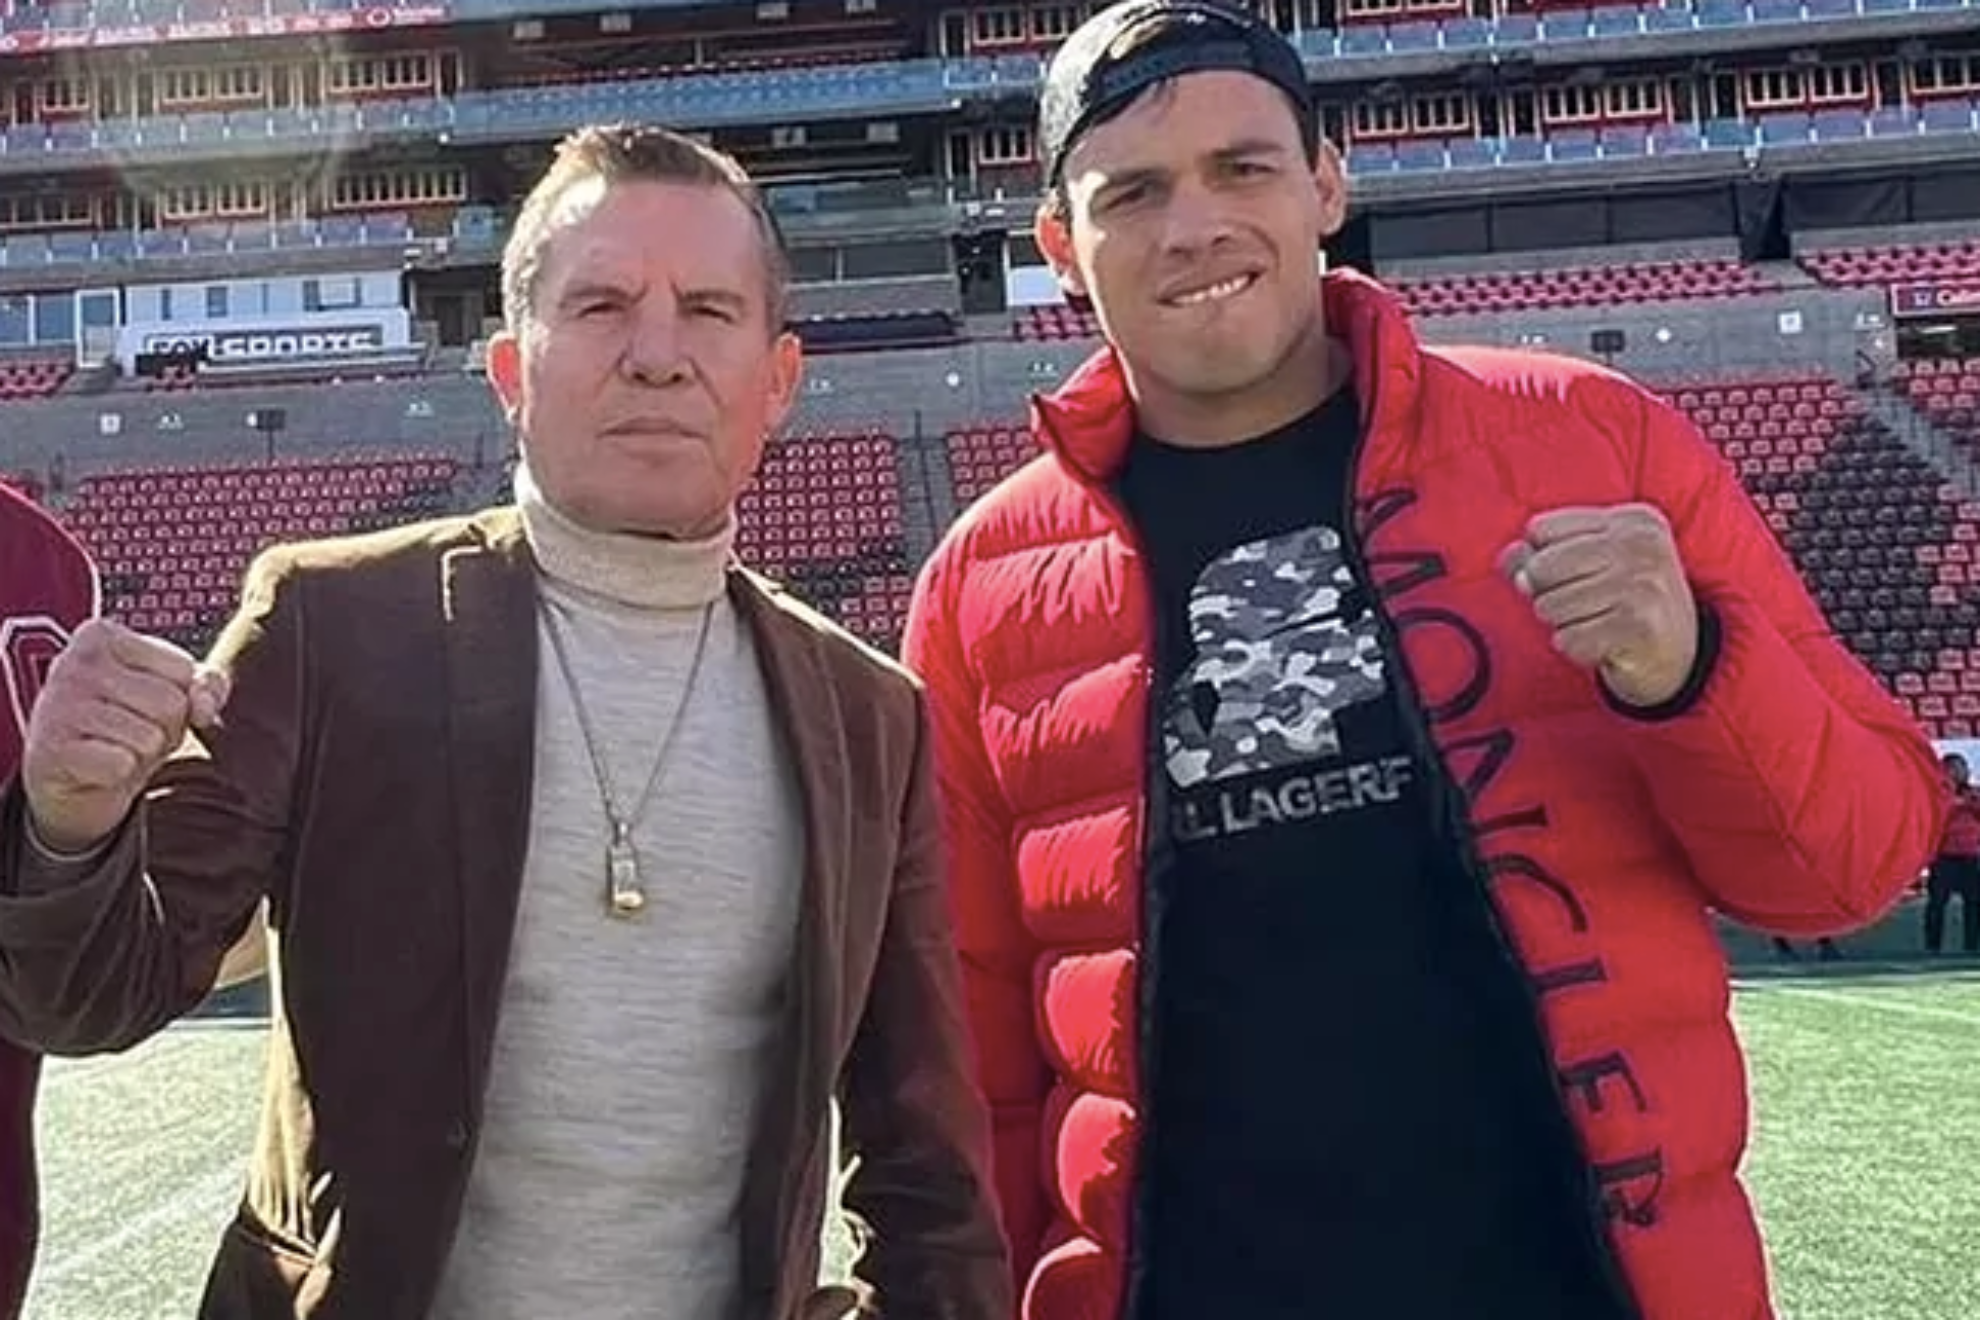 Julio Cesar Chavez speaks again about his son and addictions: He is struggling again